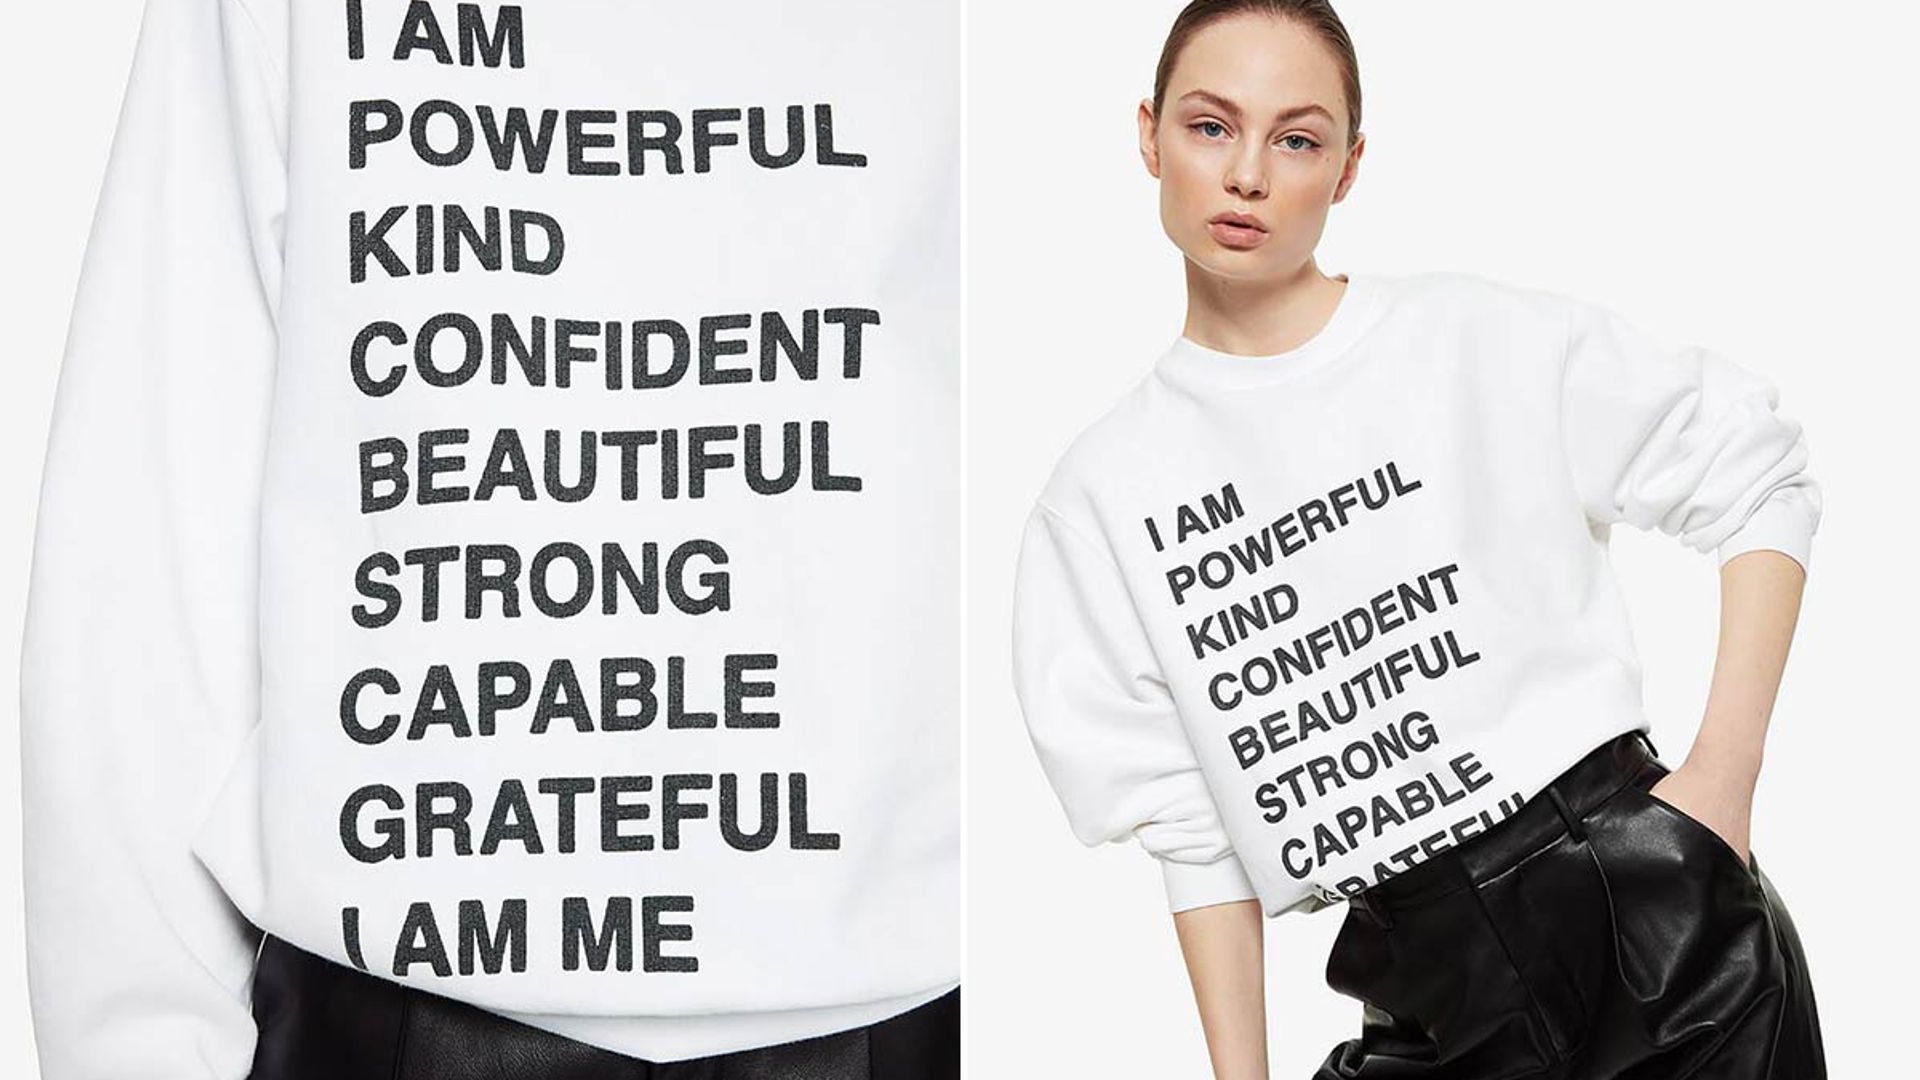 Just FYI - everyone on Instagram will be wearing Anine Bing's new empowerment jumper